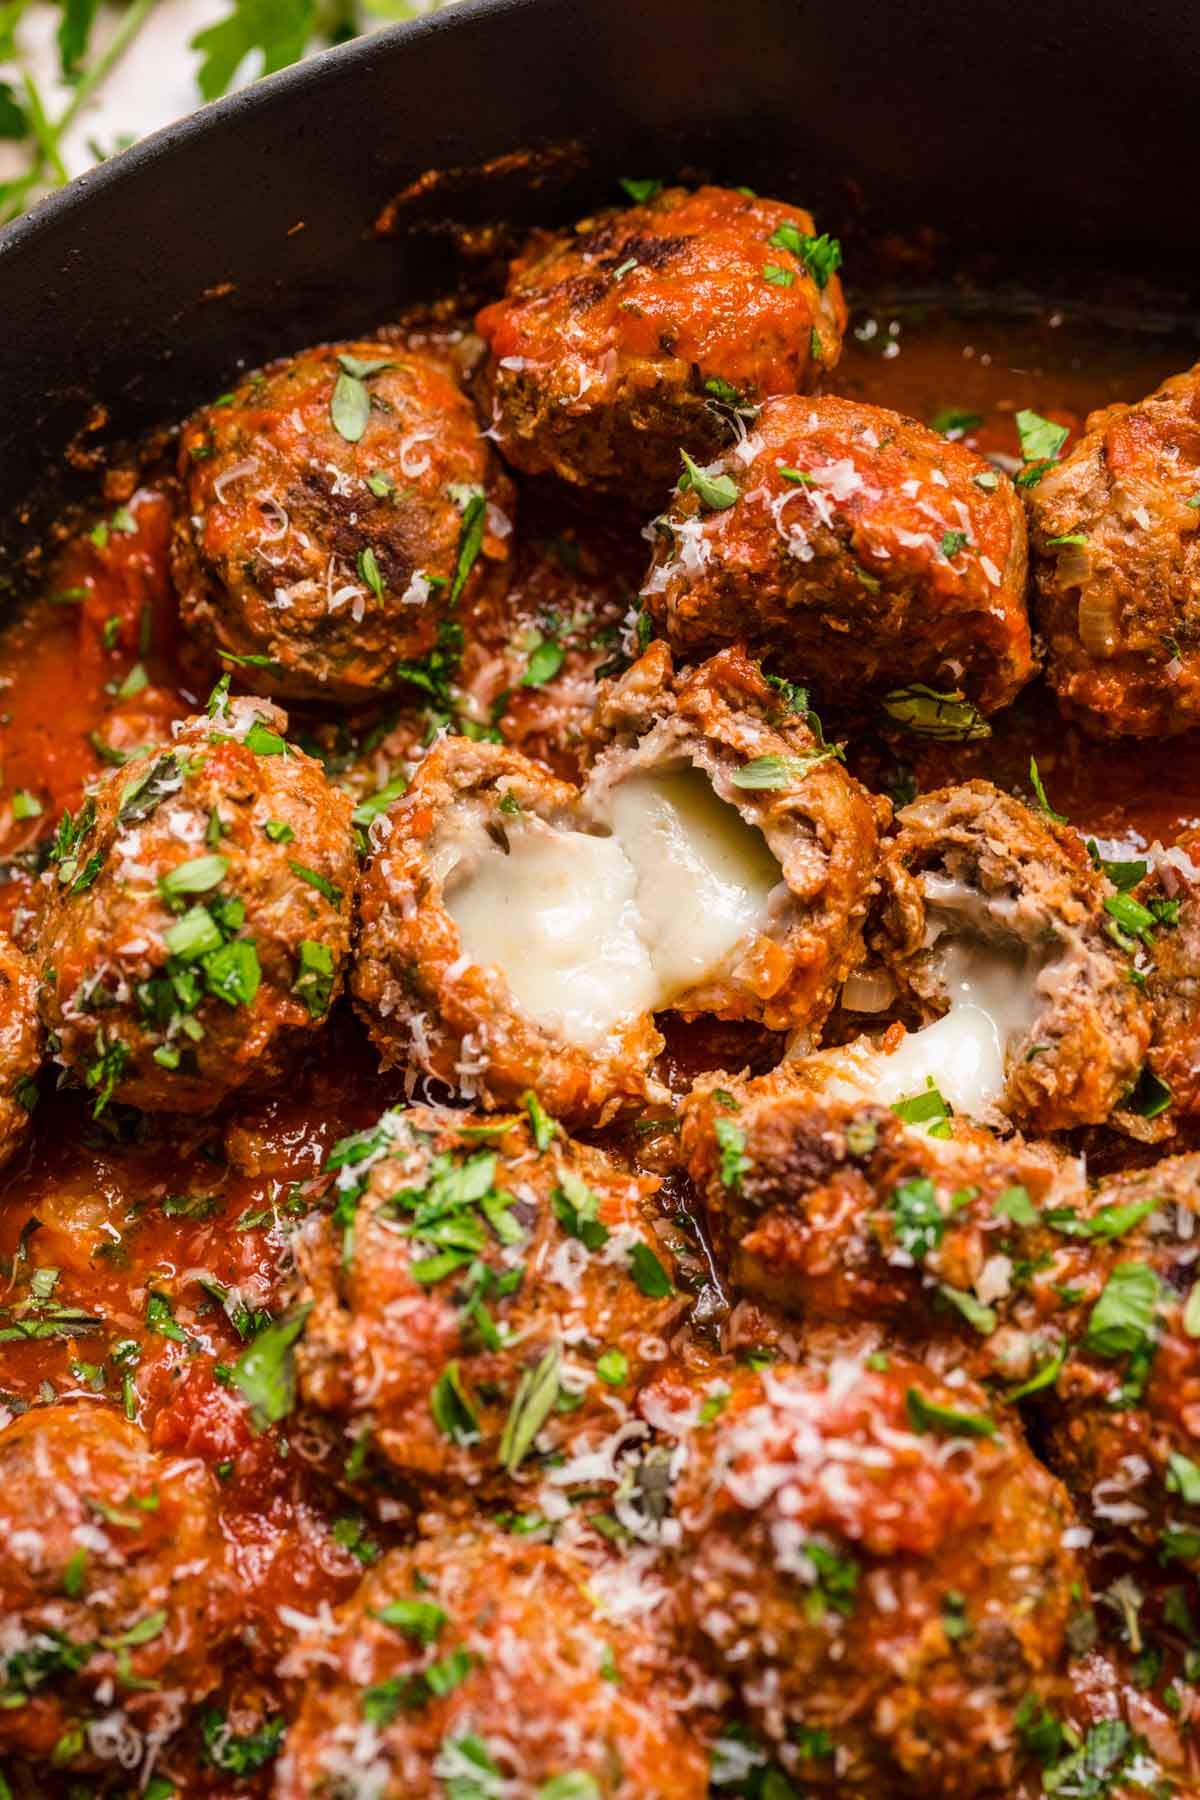 Mozzarella Stuffed Meatballs in sauce in skillet, showing melty cheese